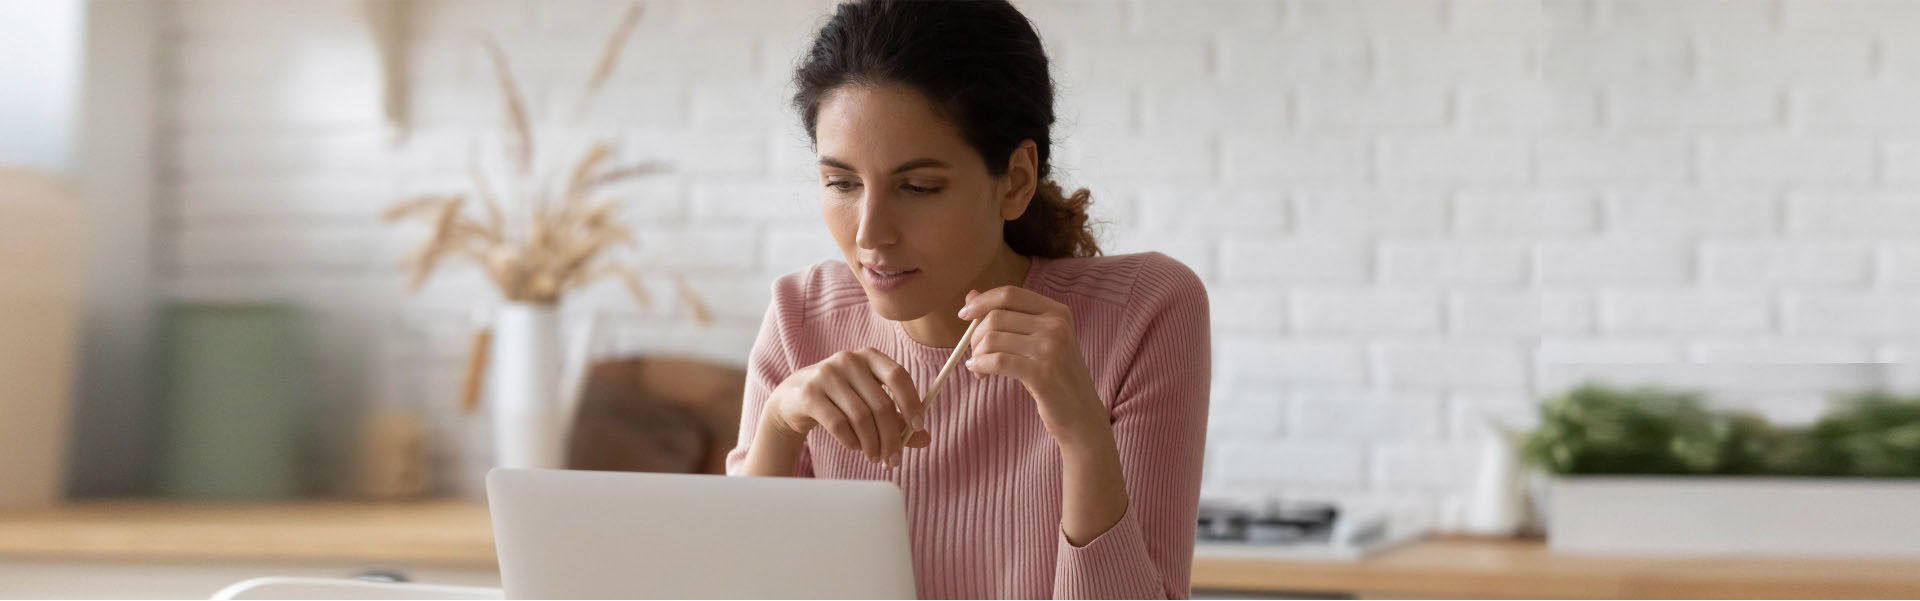 Woman on her laptop looking at her short-term savings account.